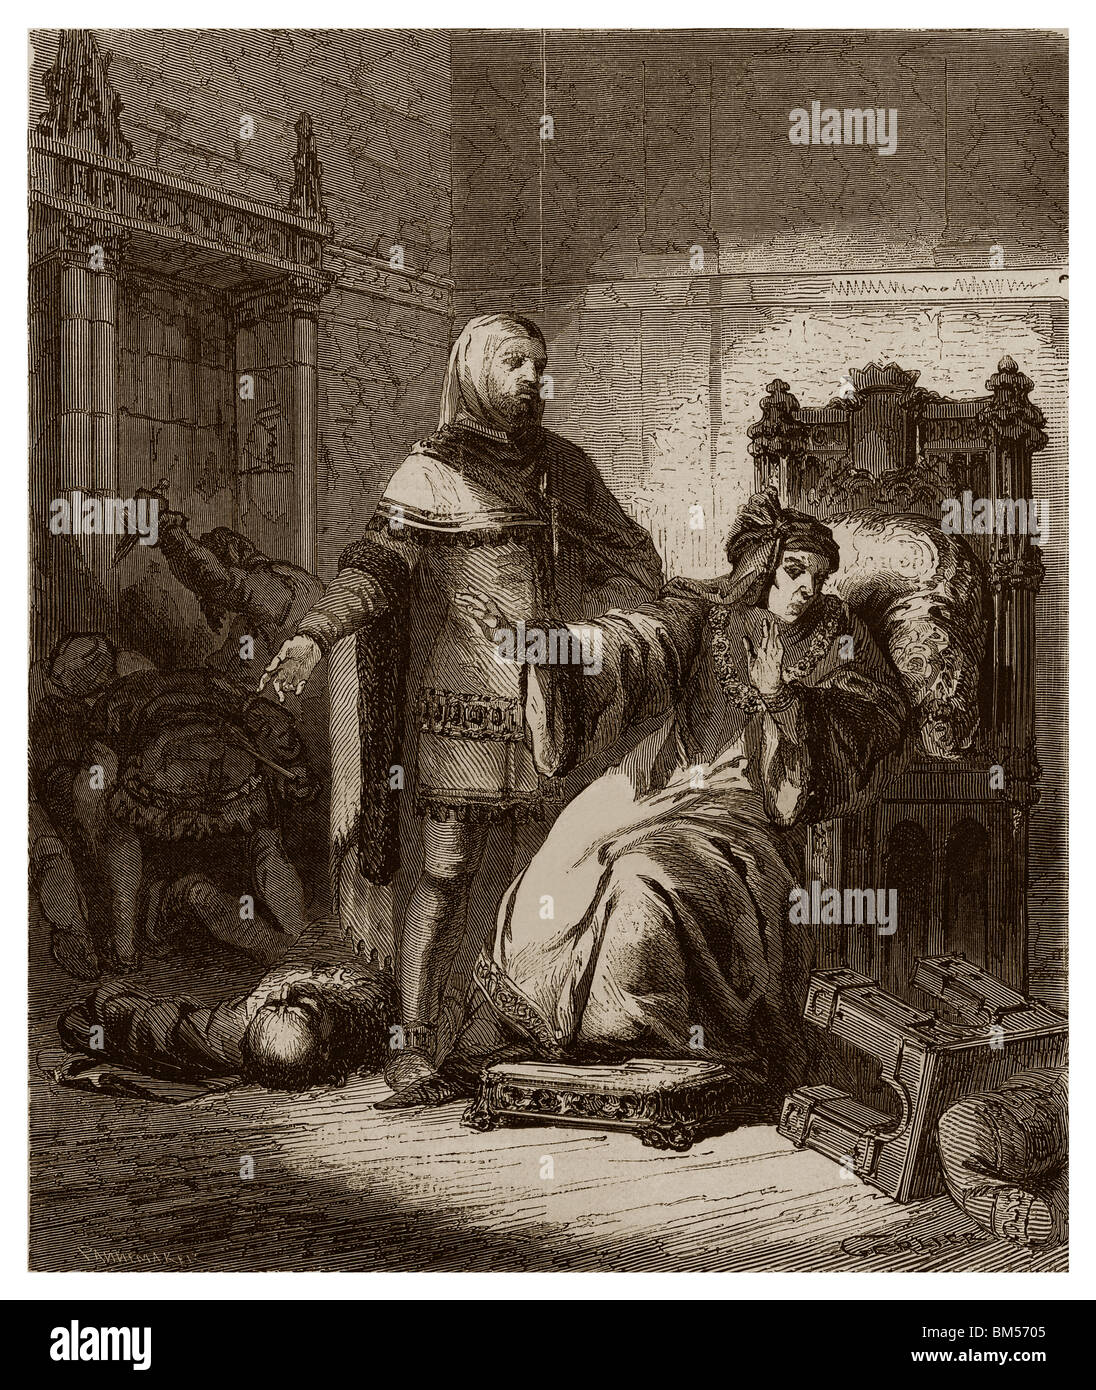 On 23rd February 1358, Provost Etienne Marcel in the room of Dauphin Charles V. Stock Photo